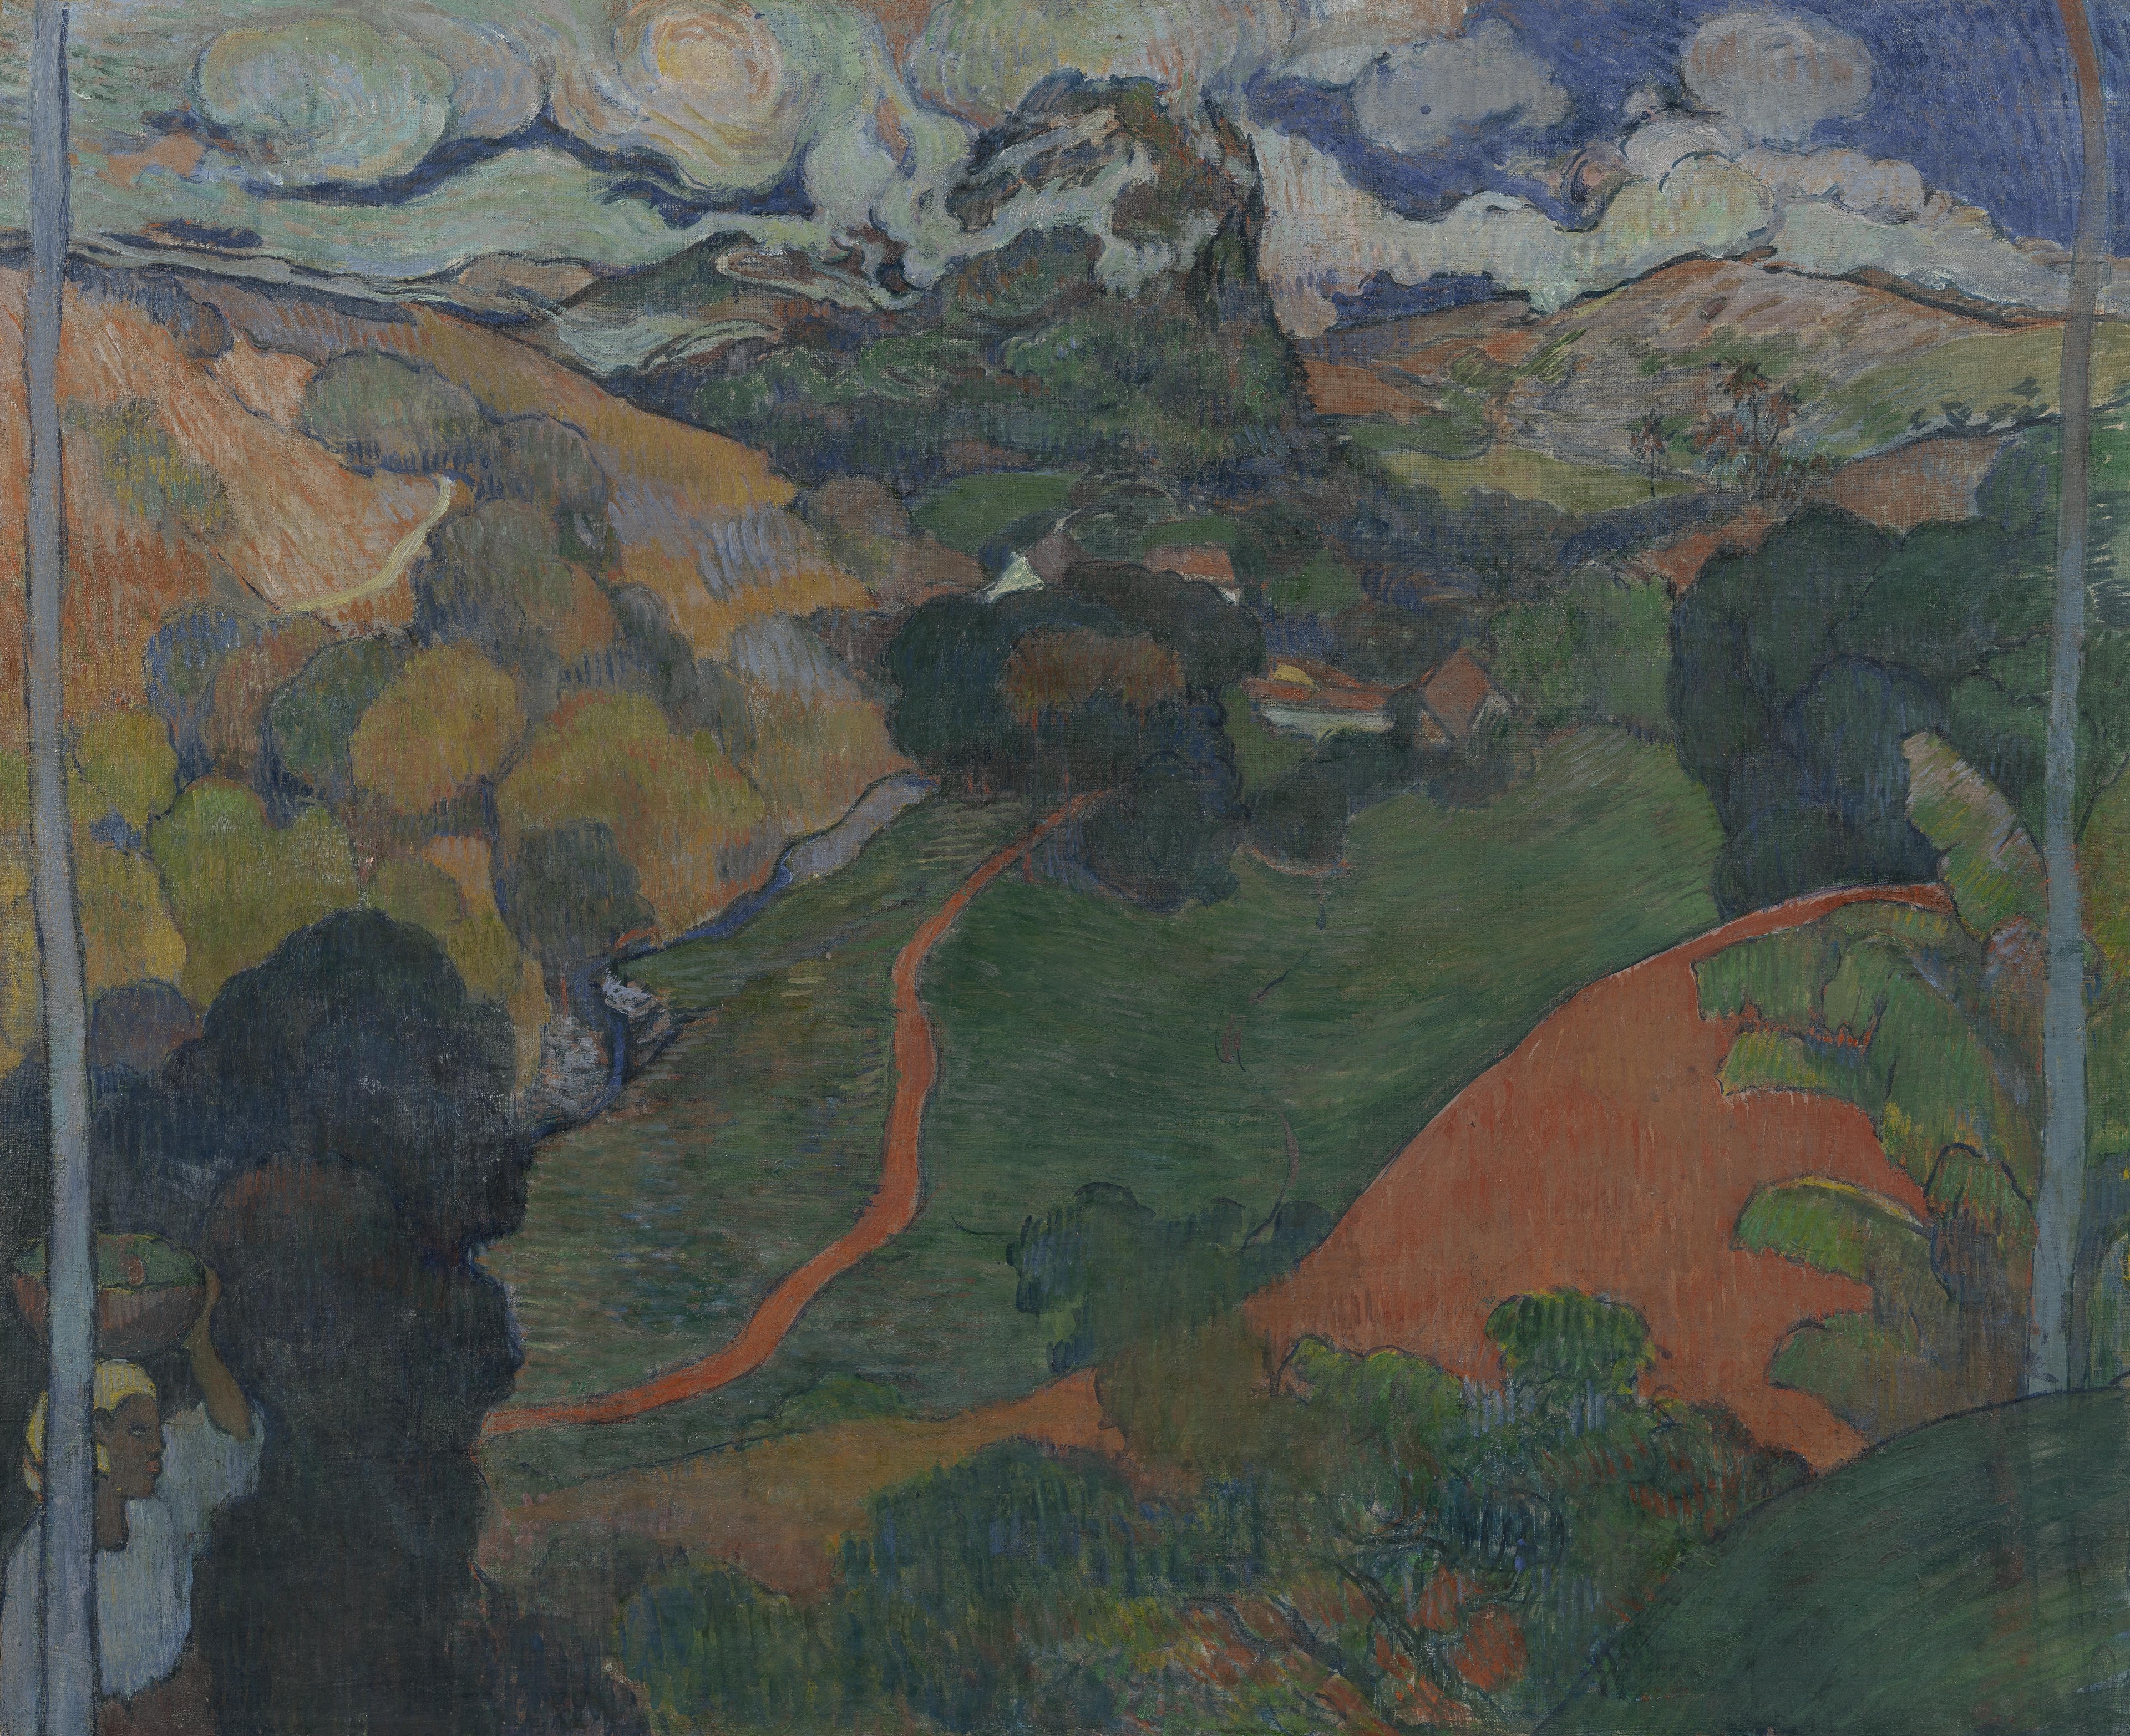 Landscape on Martinique by Charles Laval - 1887-1888 - 59.7 x 73.1 cm Van Gogh Museum